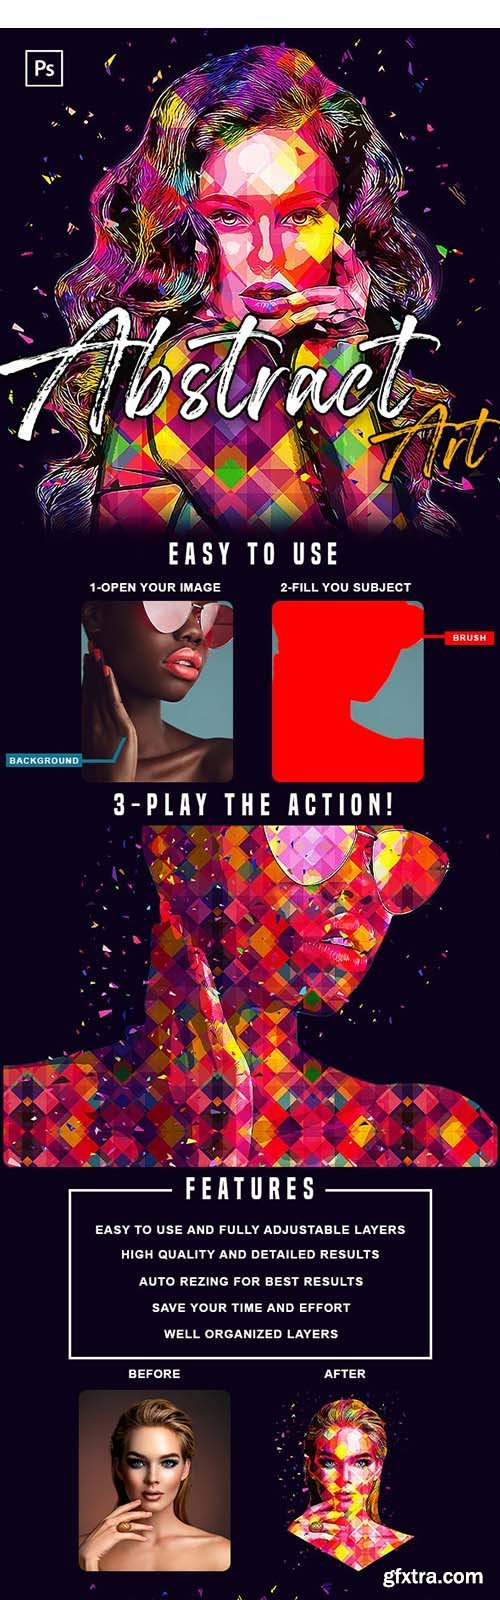 GraphicRiver - Abstract Art - Photoshop Action 33825986